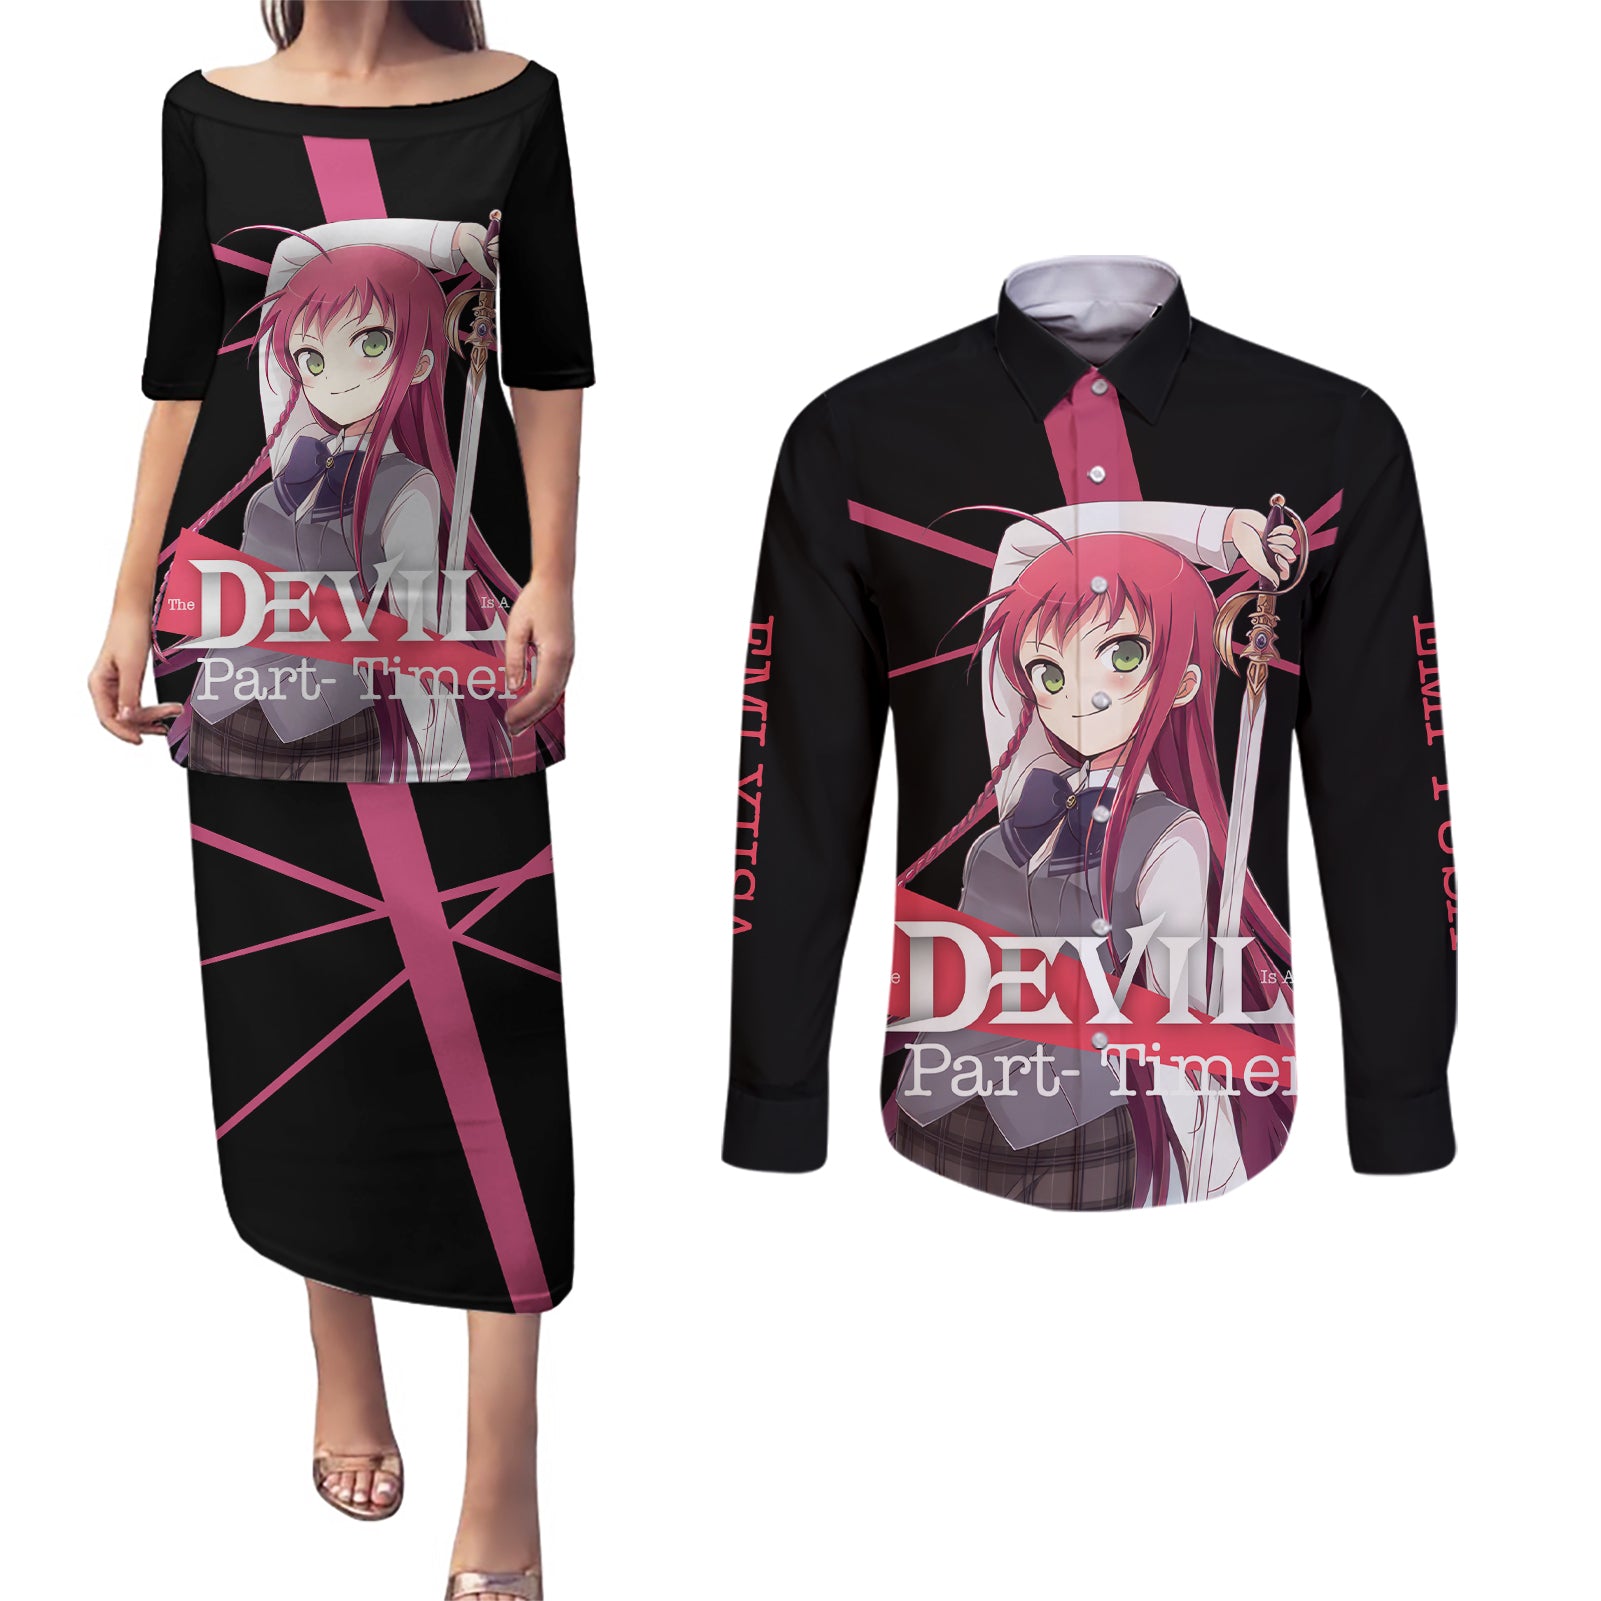 Emi Yusa The Devil Part Timer Couples Matching Puletasi and Long Sleeve Button Shirt Anime Style